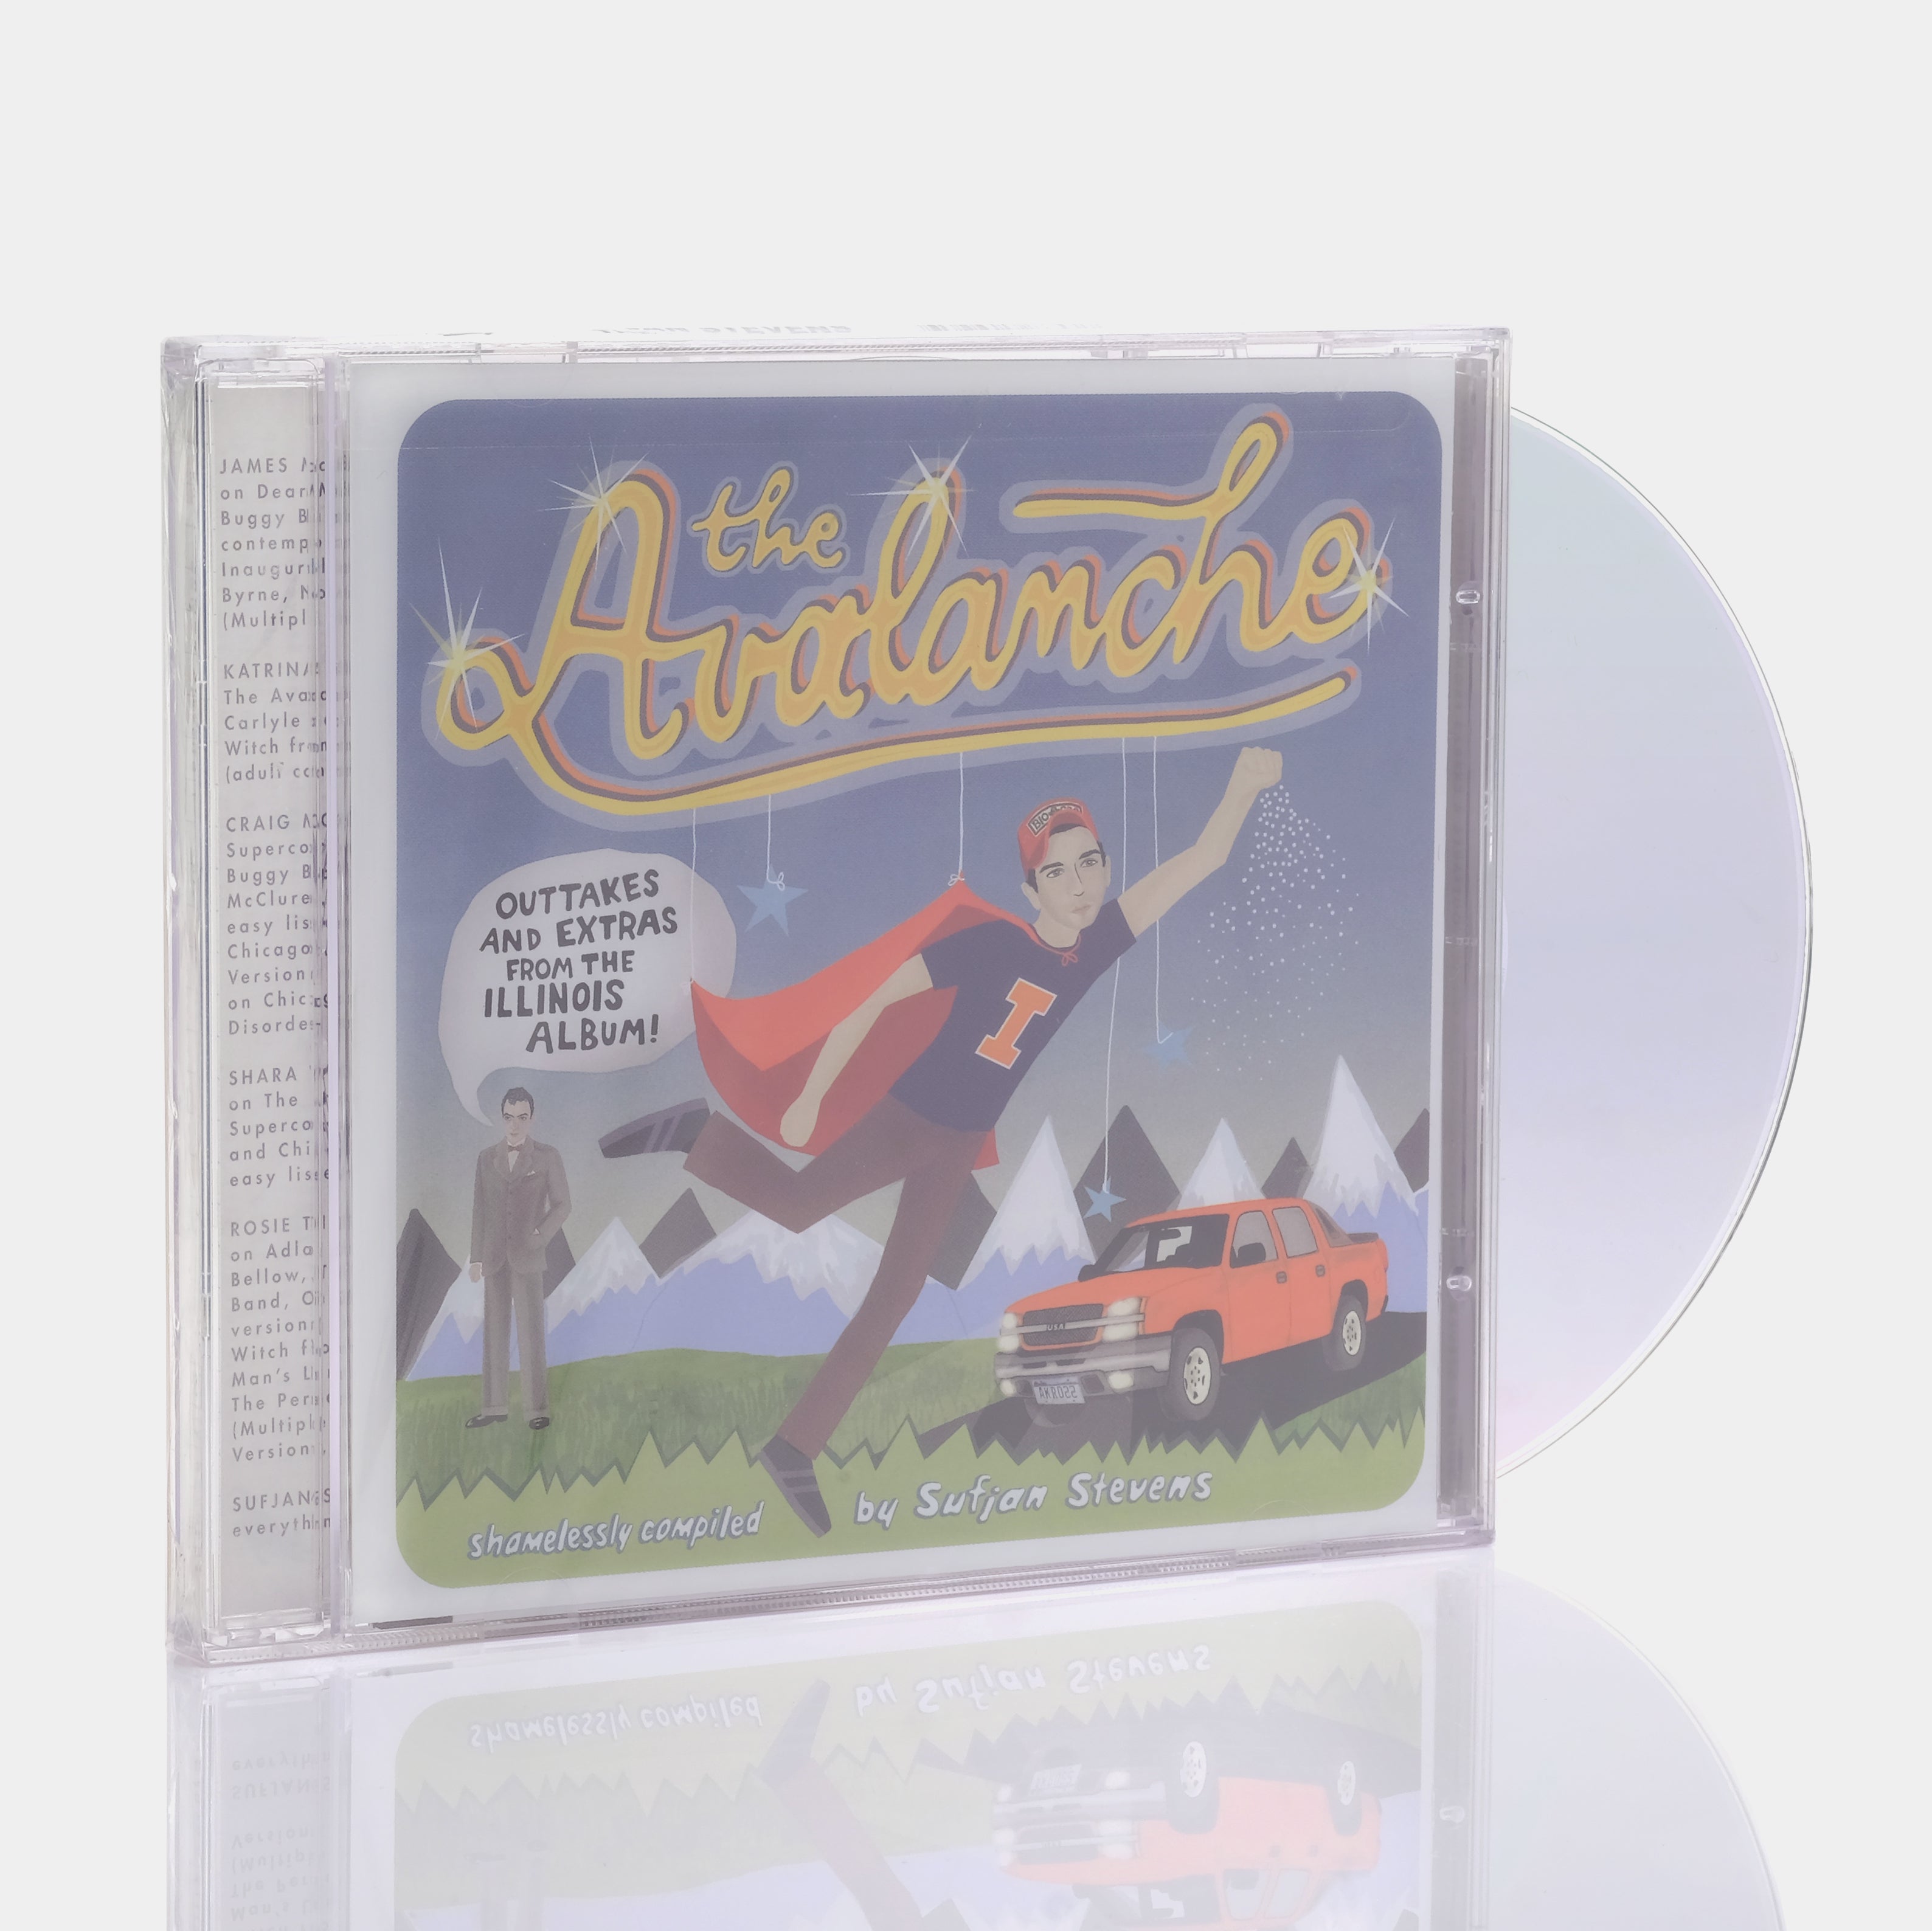 Sufjan Stevens - The Avalanche (Outtakes & Extras From The Illinois Album) CD